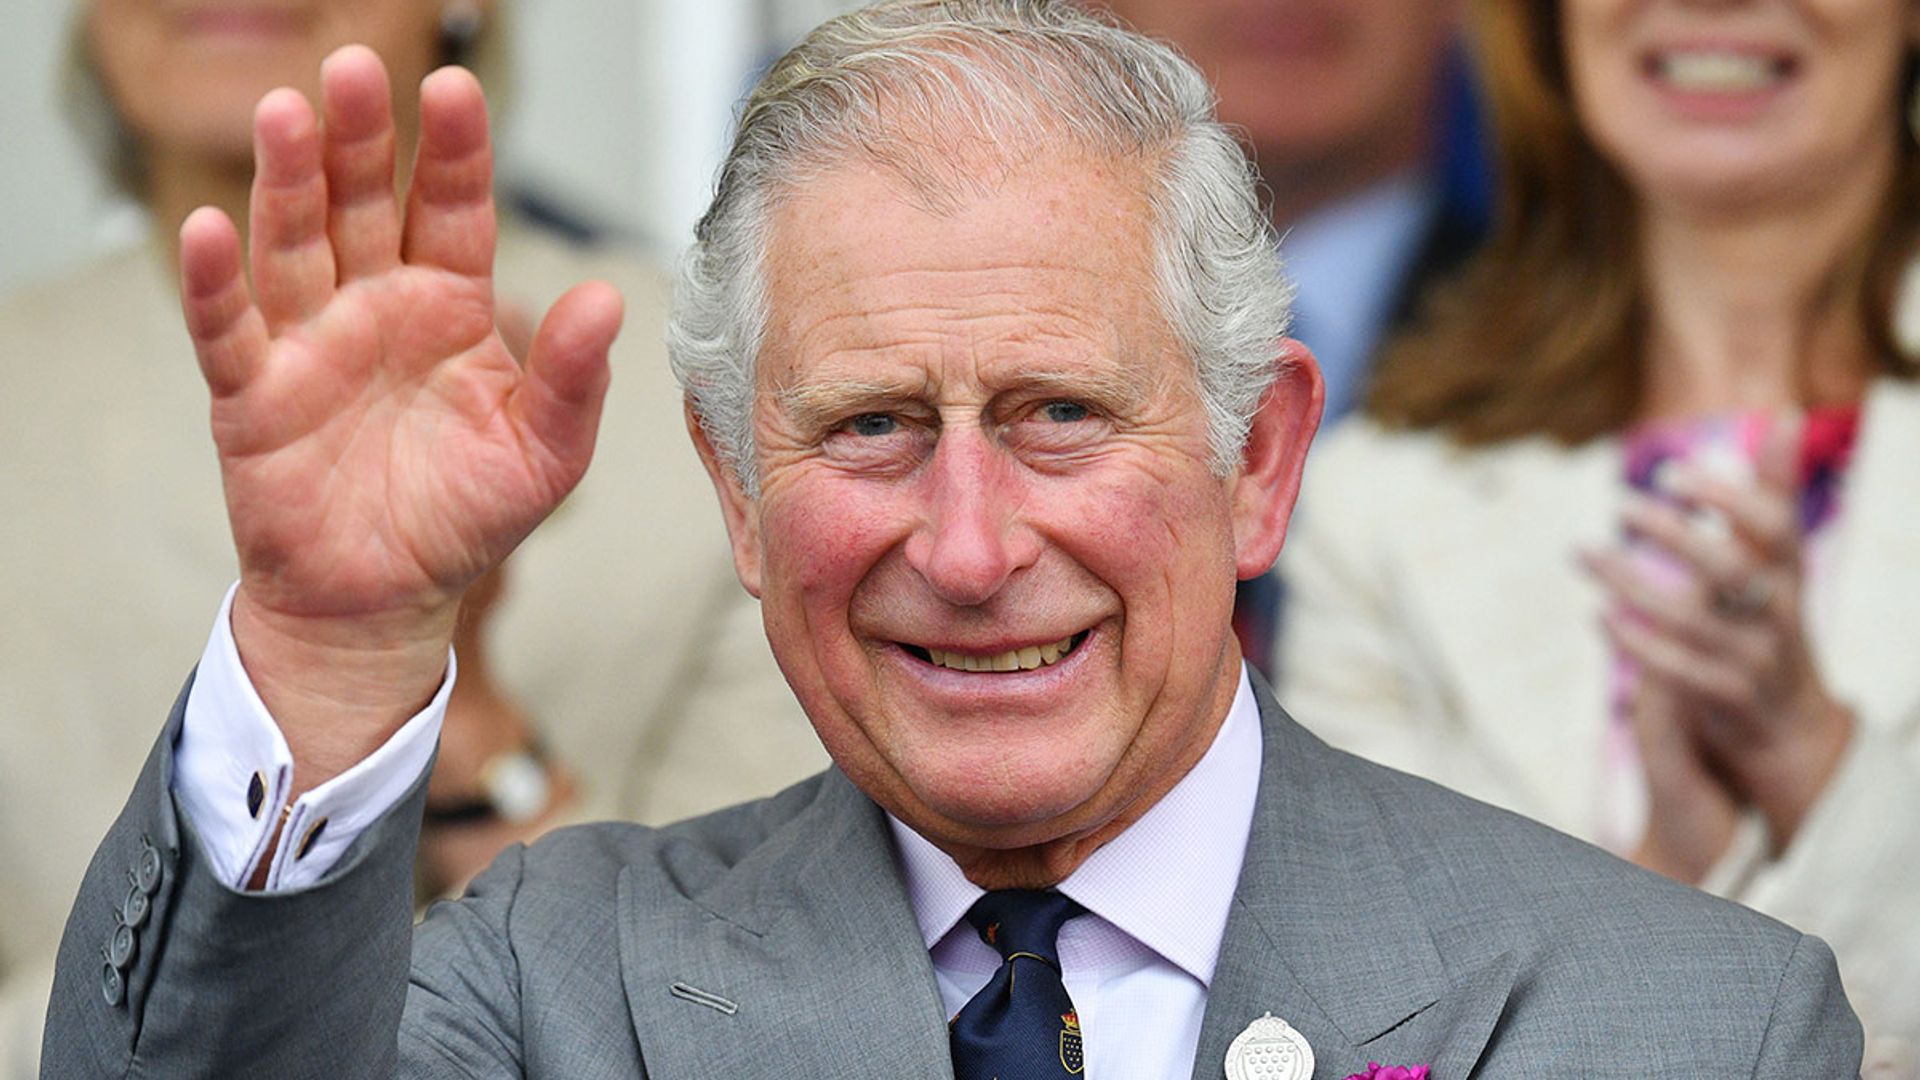 Prince Charles, The Prince Of Wales Latest News & Pictures - HELLO!